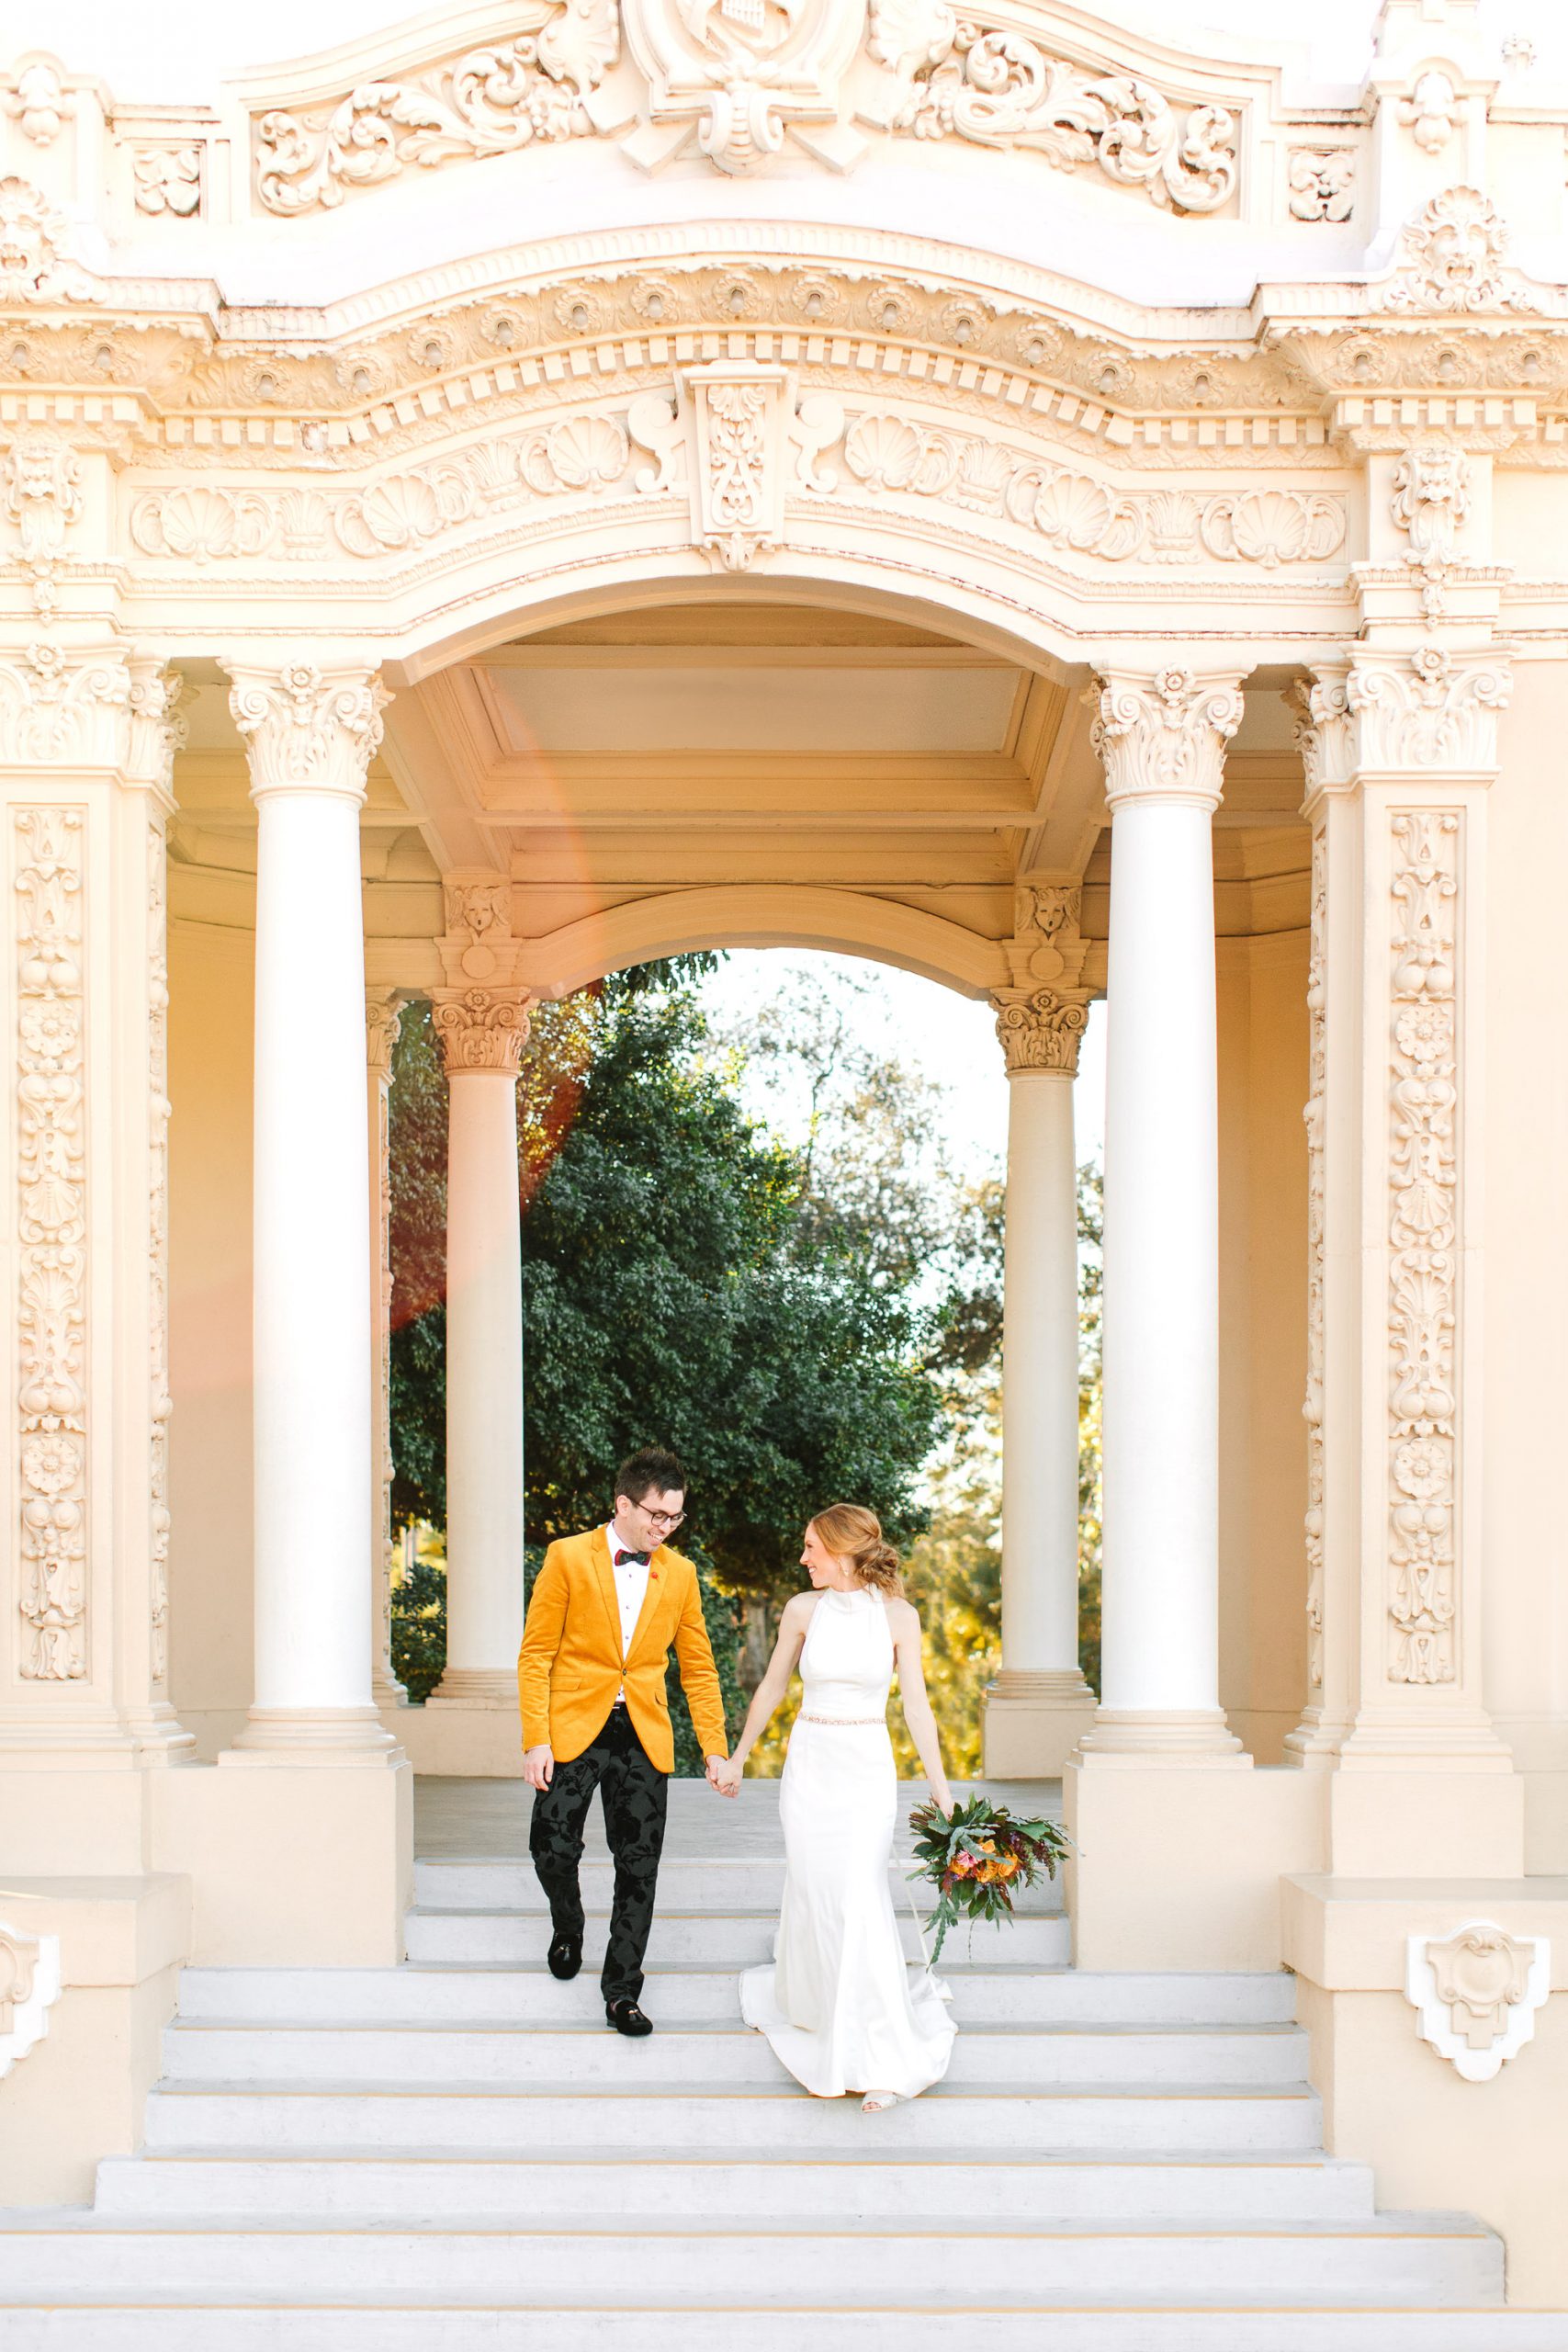 Wedding couple at Spreckels Organ Pavilion in Balboa Park by Mary Costa Photography